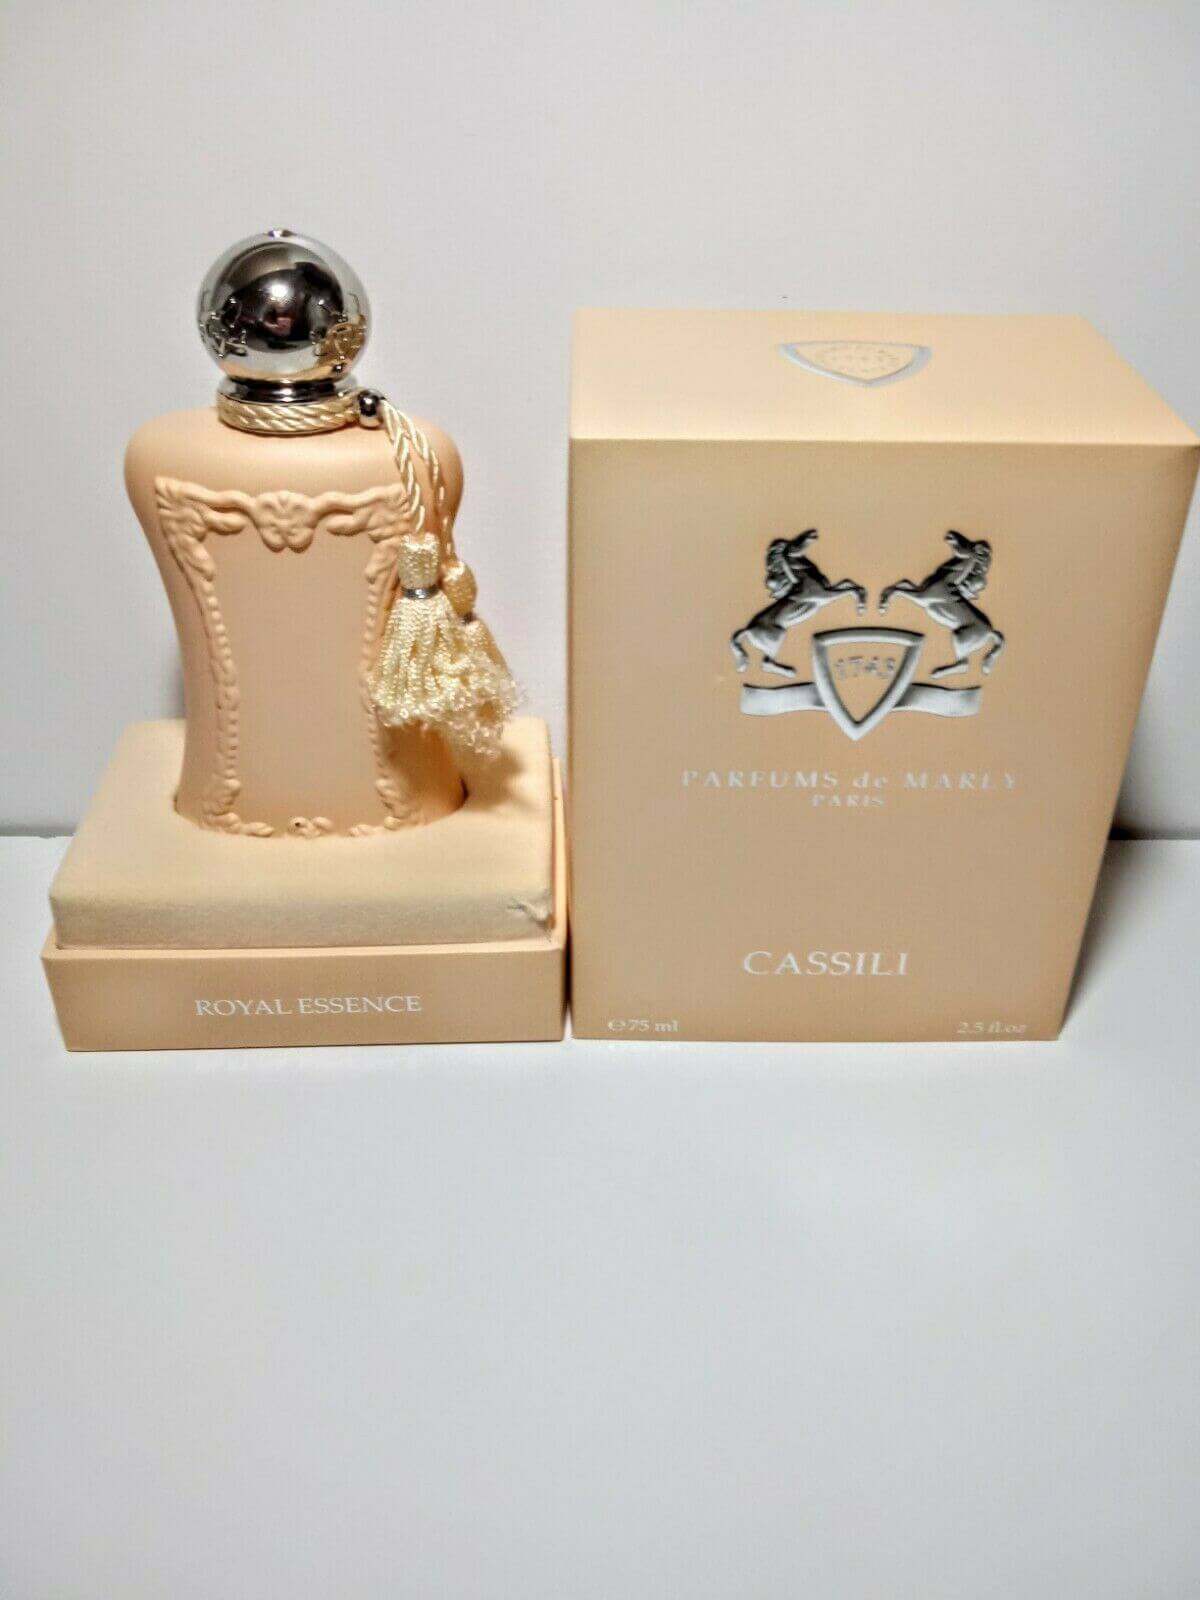 Parfums de Marly cassili 10ml large perfume is not for sale - crabtree